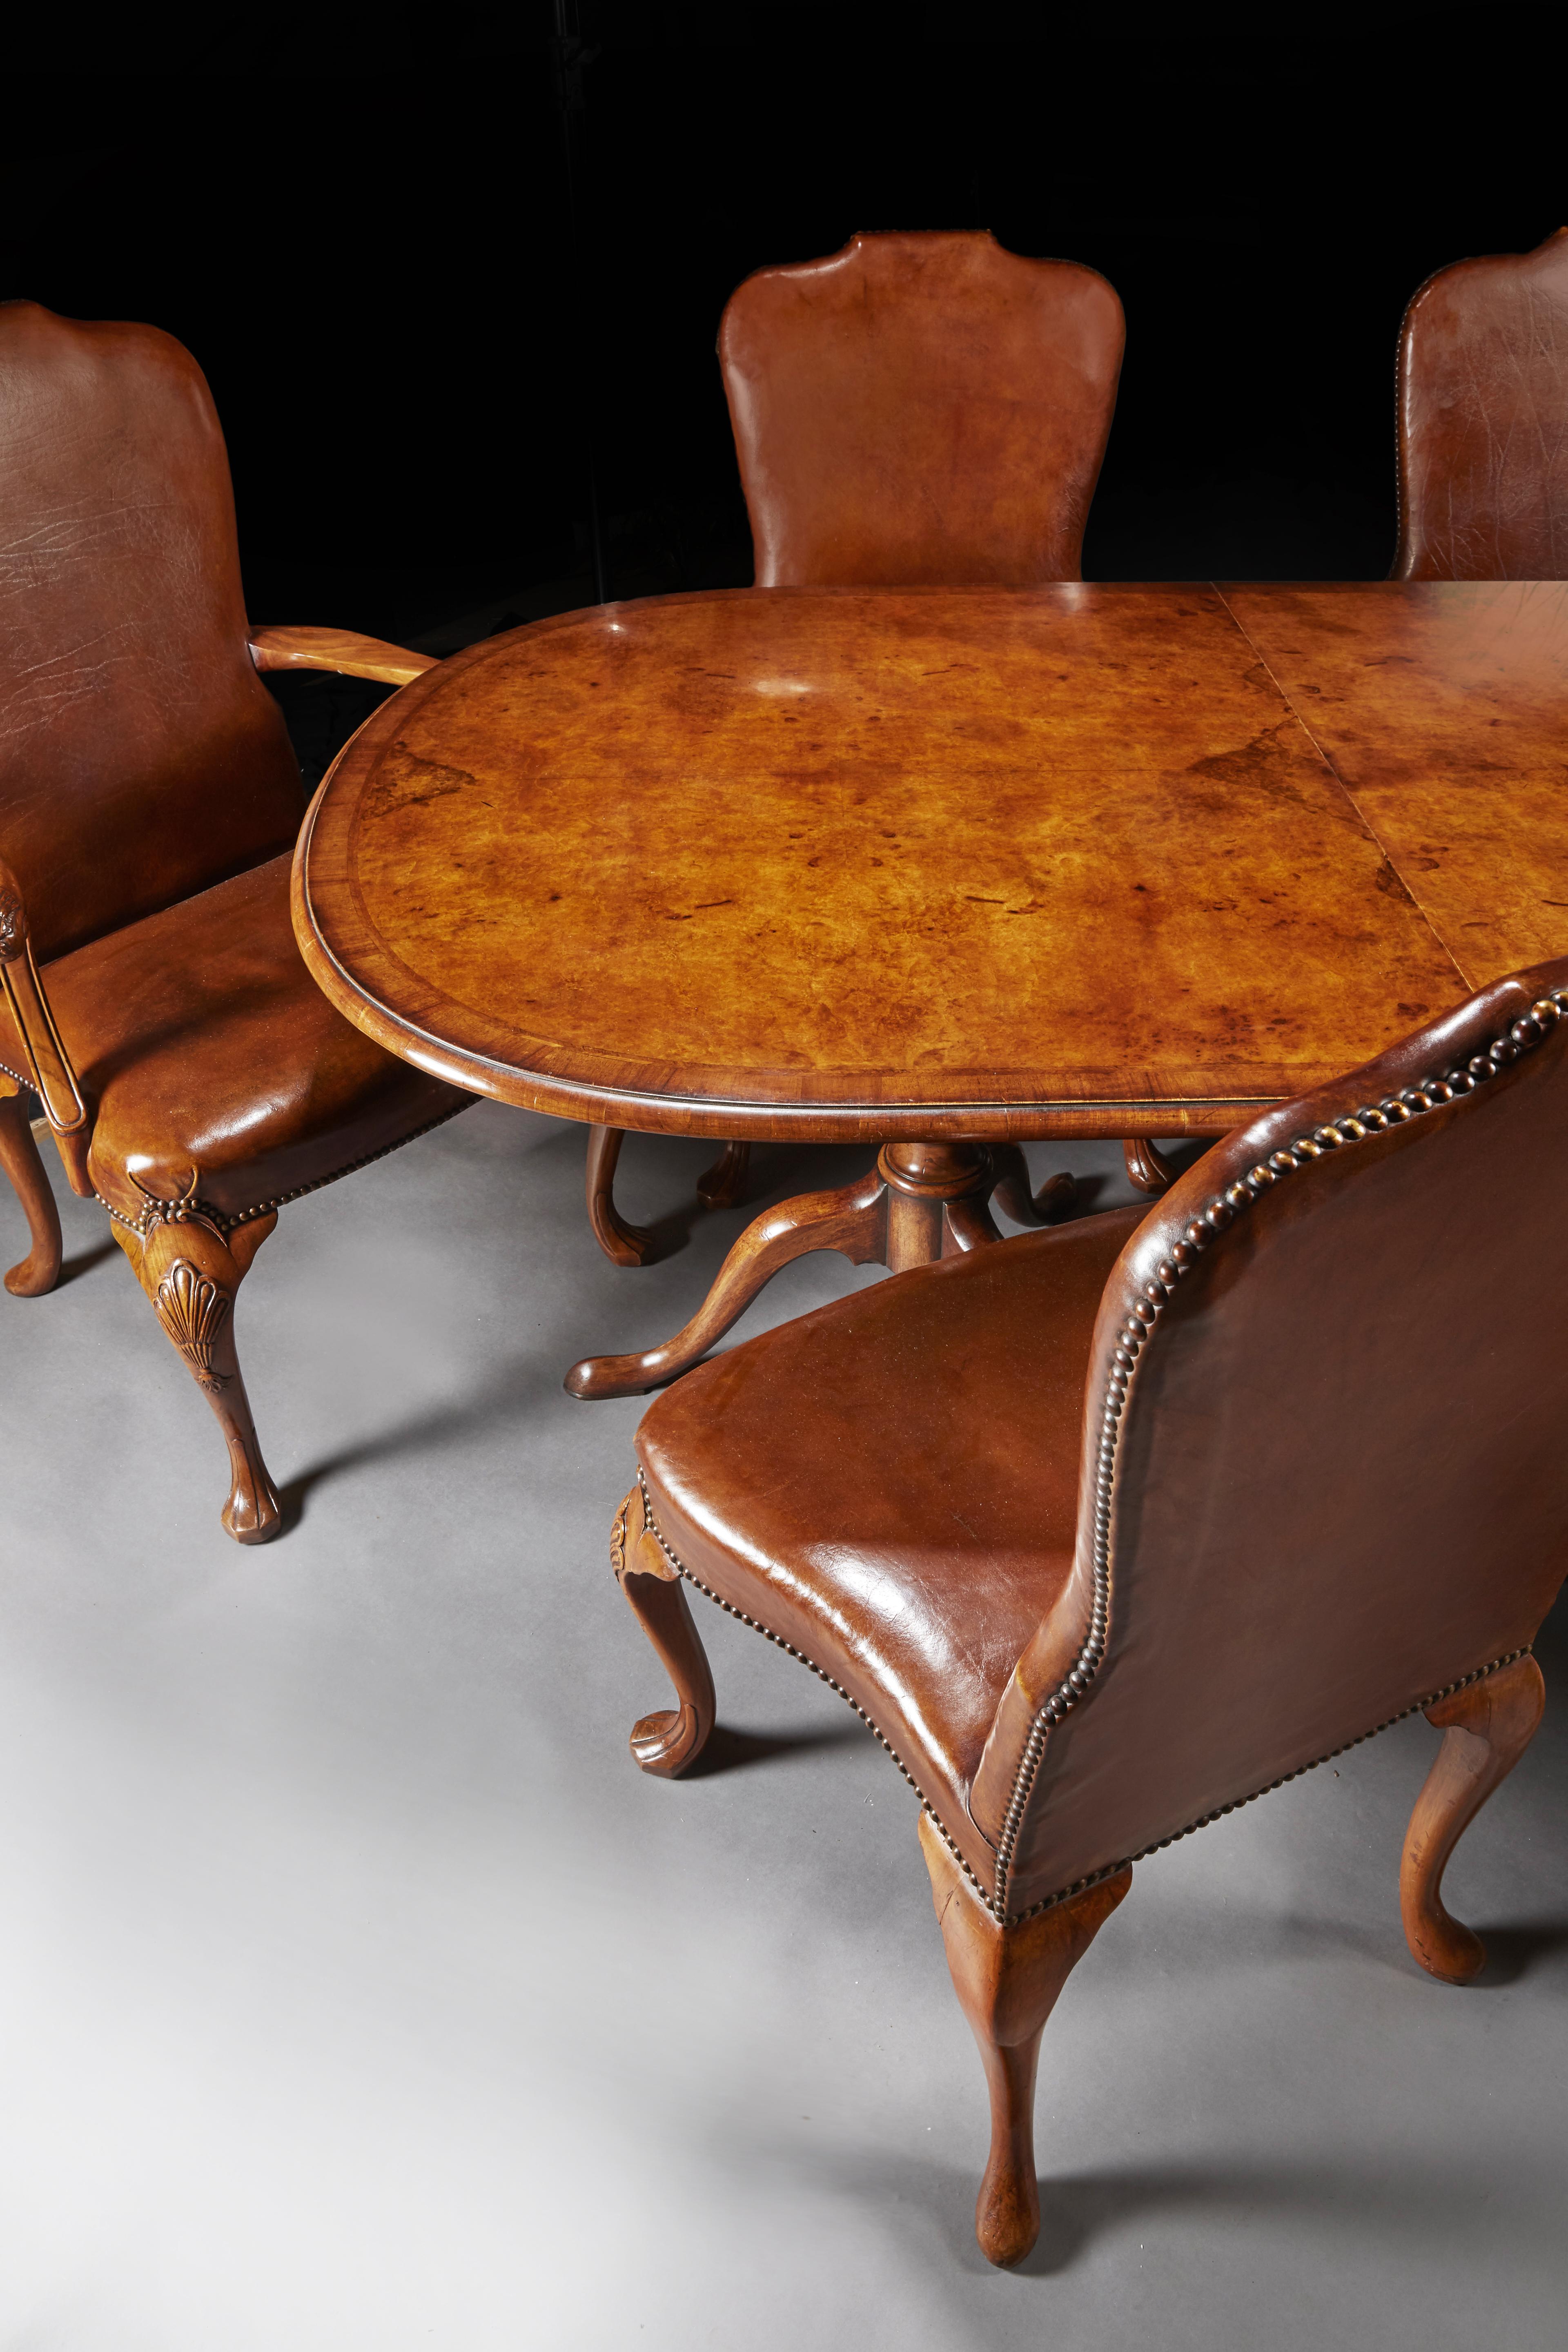 British Antique Early 20th Century Walnut Dining Table Set with 8 Leather Chairs